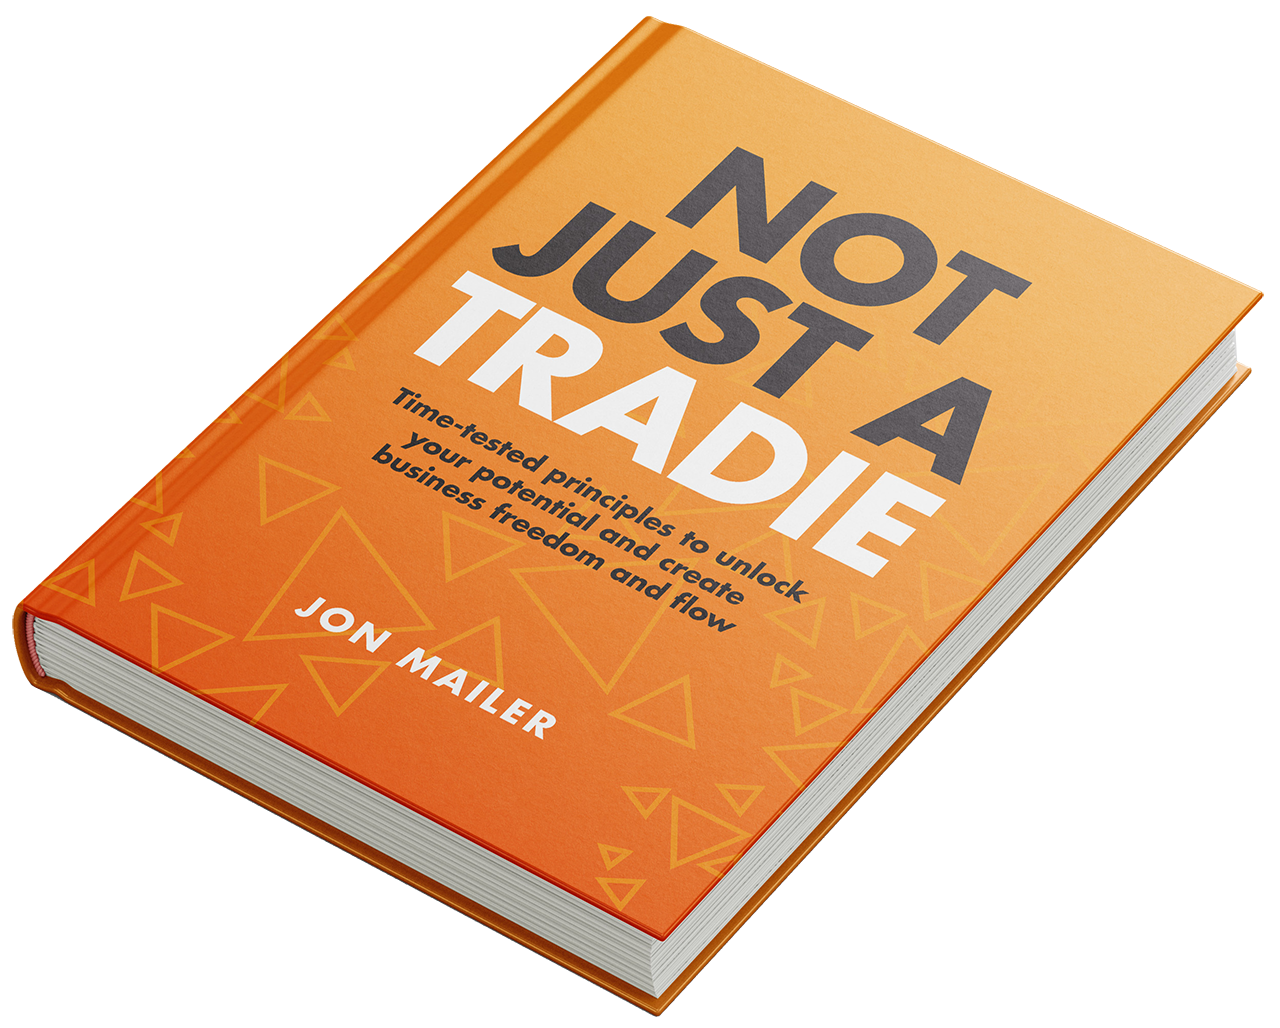 Not Just A Tradie Book by Jon Mailer